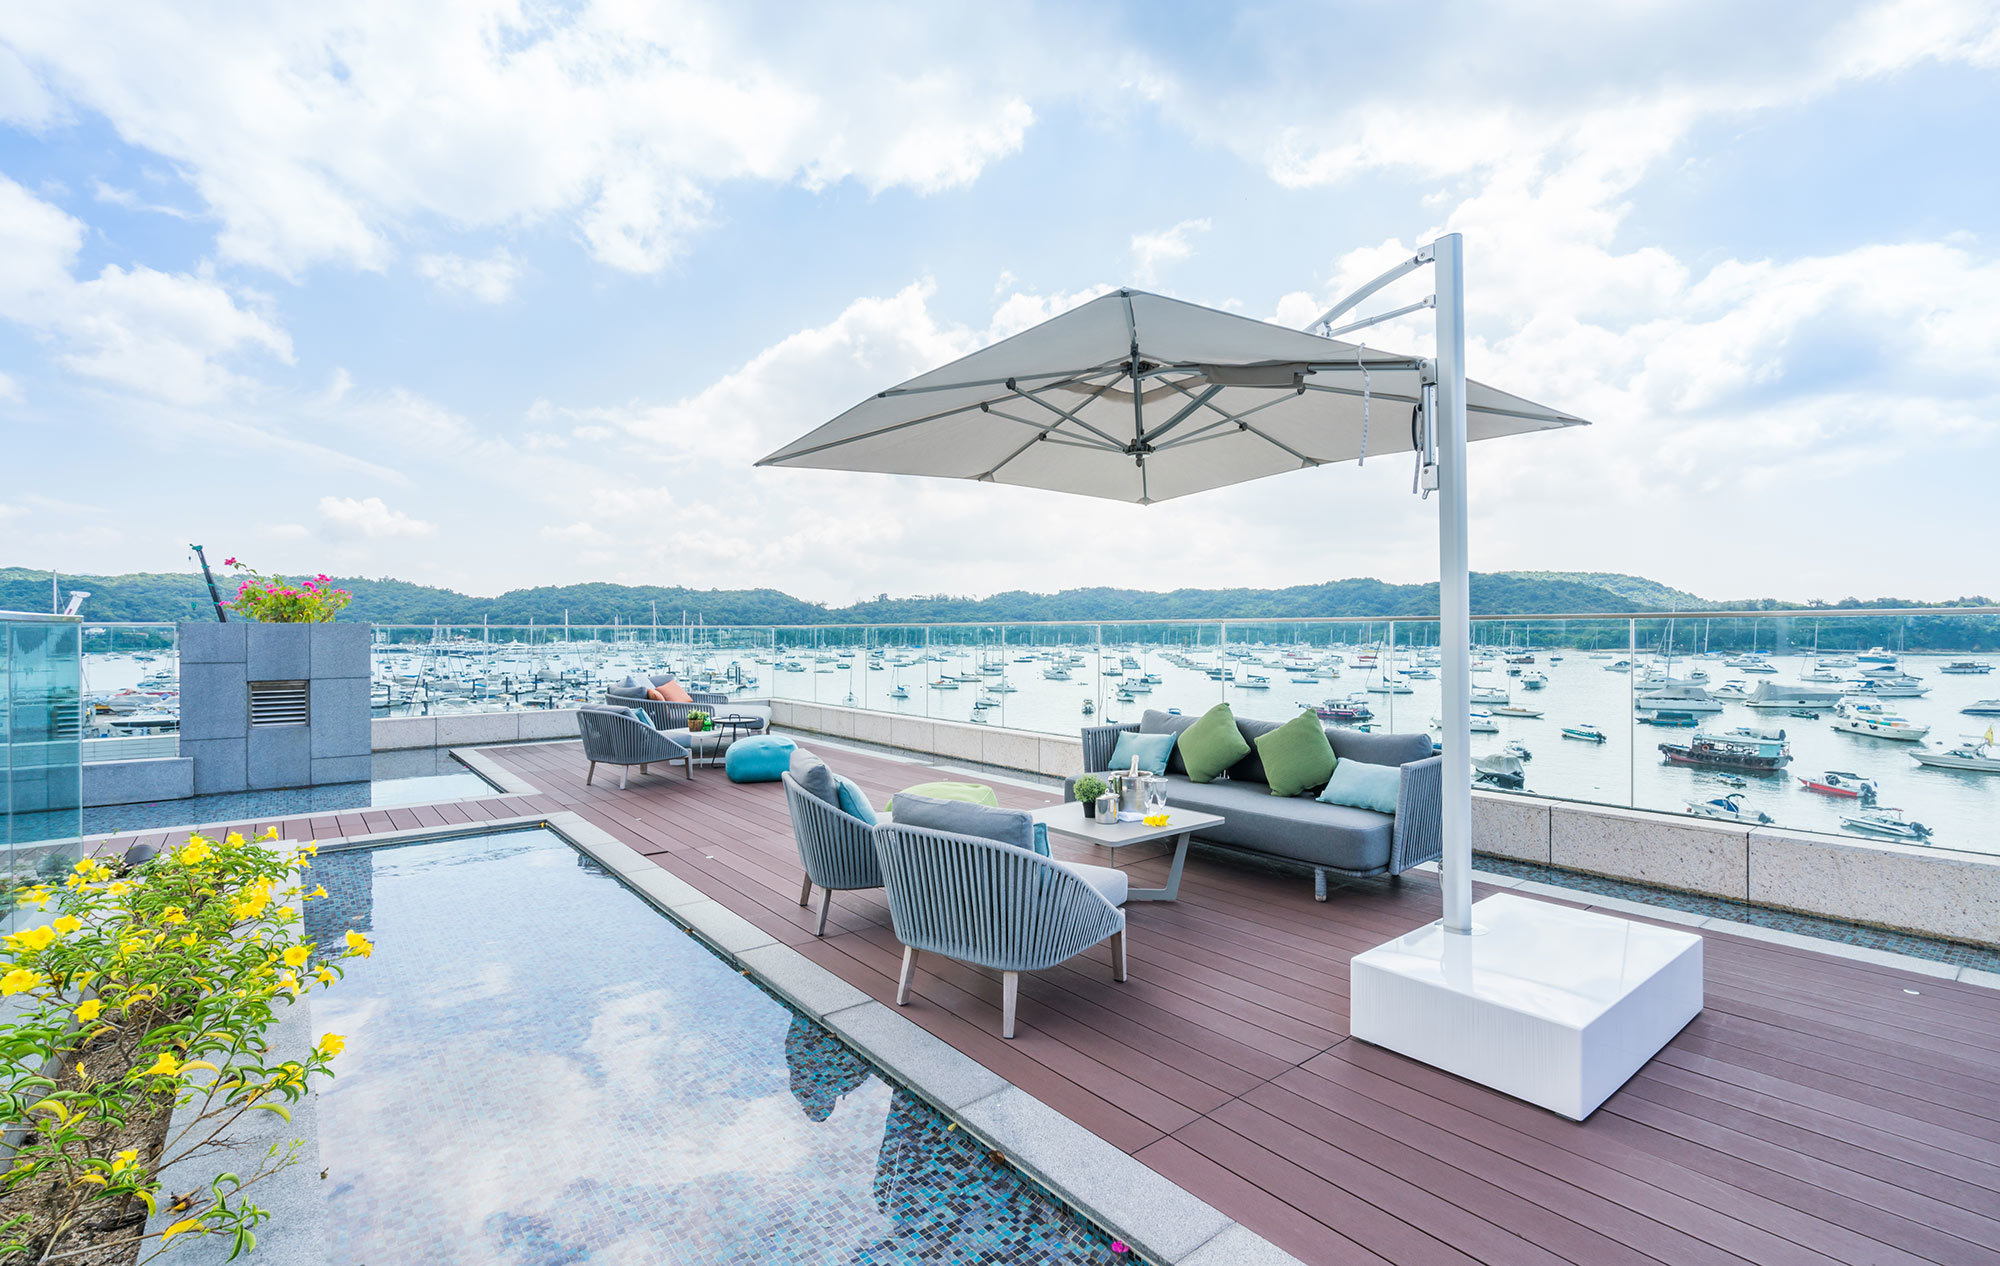 The rooftop of the Pier Hotel in Sai Kung, New Territories, Hong Kong